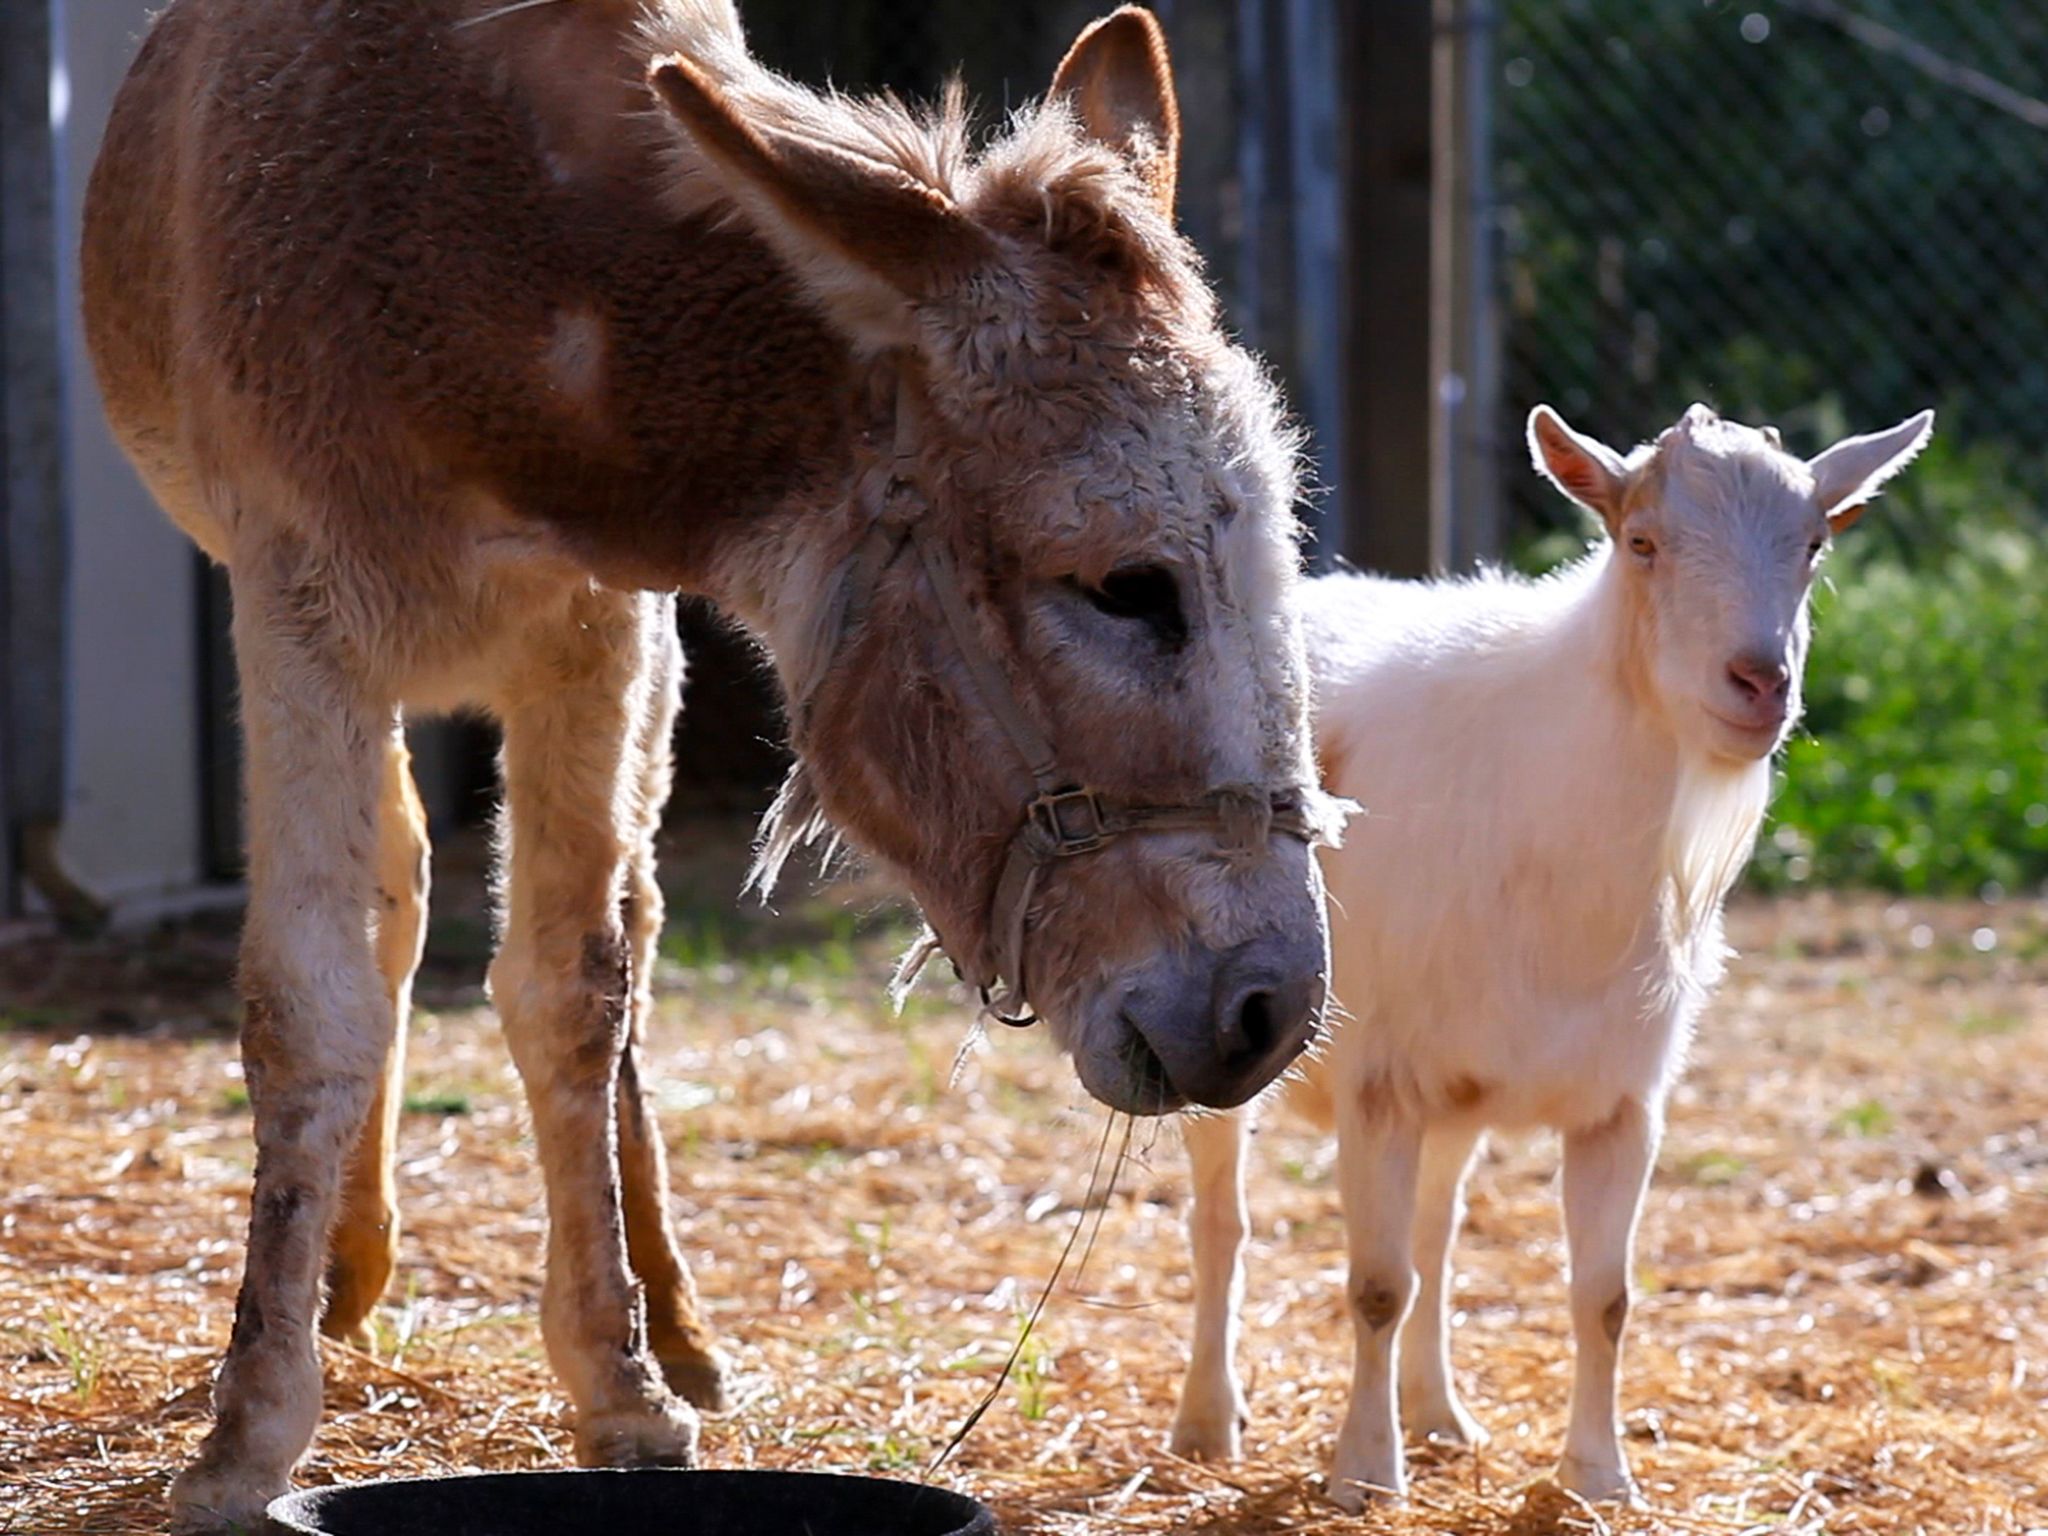 Grass Valley, CA.:  Unlikely animal friends Jellybean, a donkey, and  Mr. G, a goat, stand... [Photo of the day - April 2015]